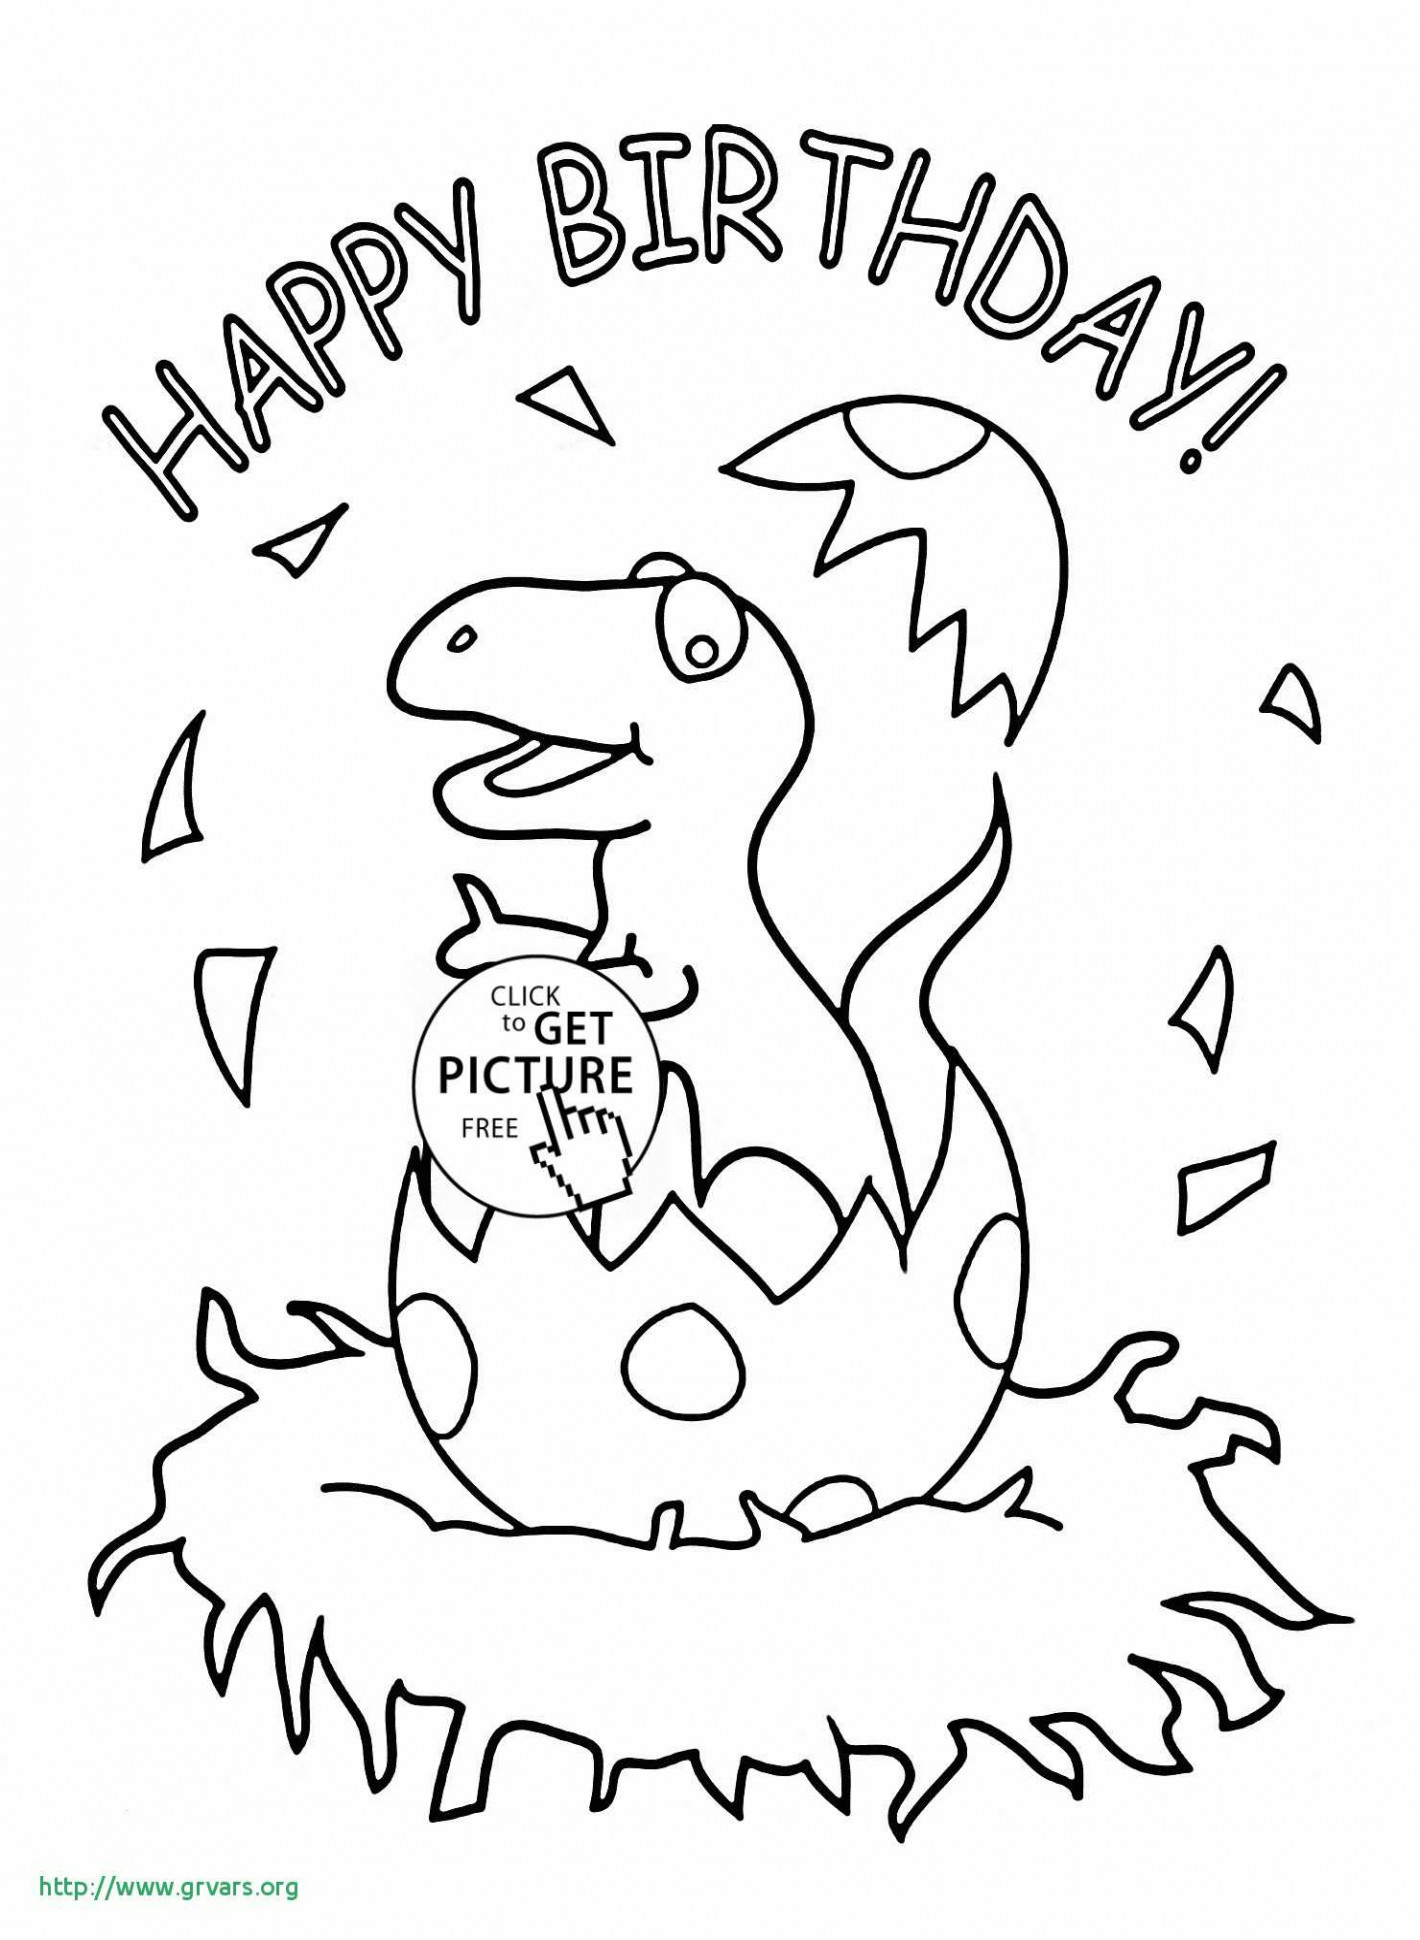 Coloring Pages For Birthday Happy Birthday Coloring Pages For Kids Coloring Pages Birthday Card